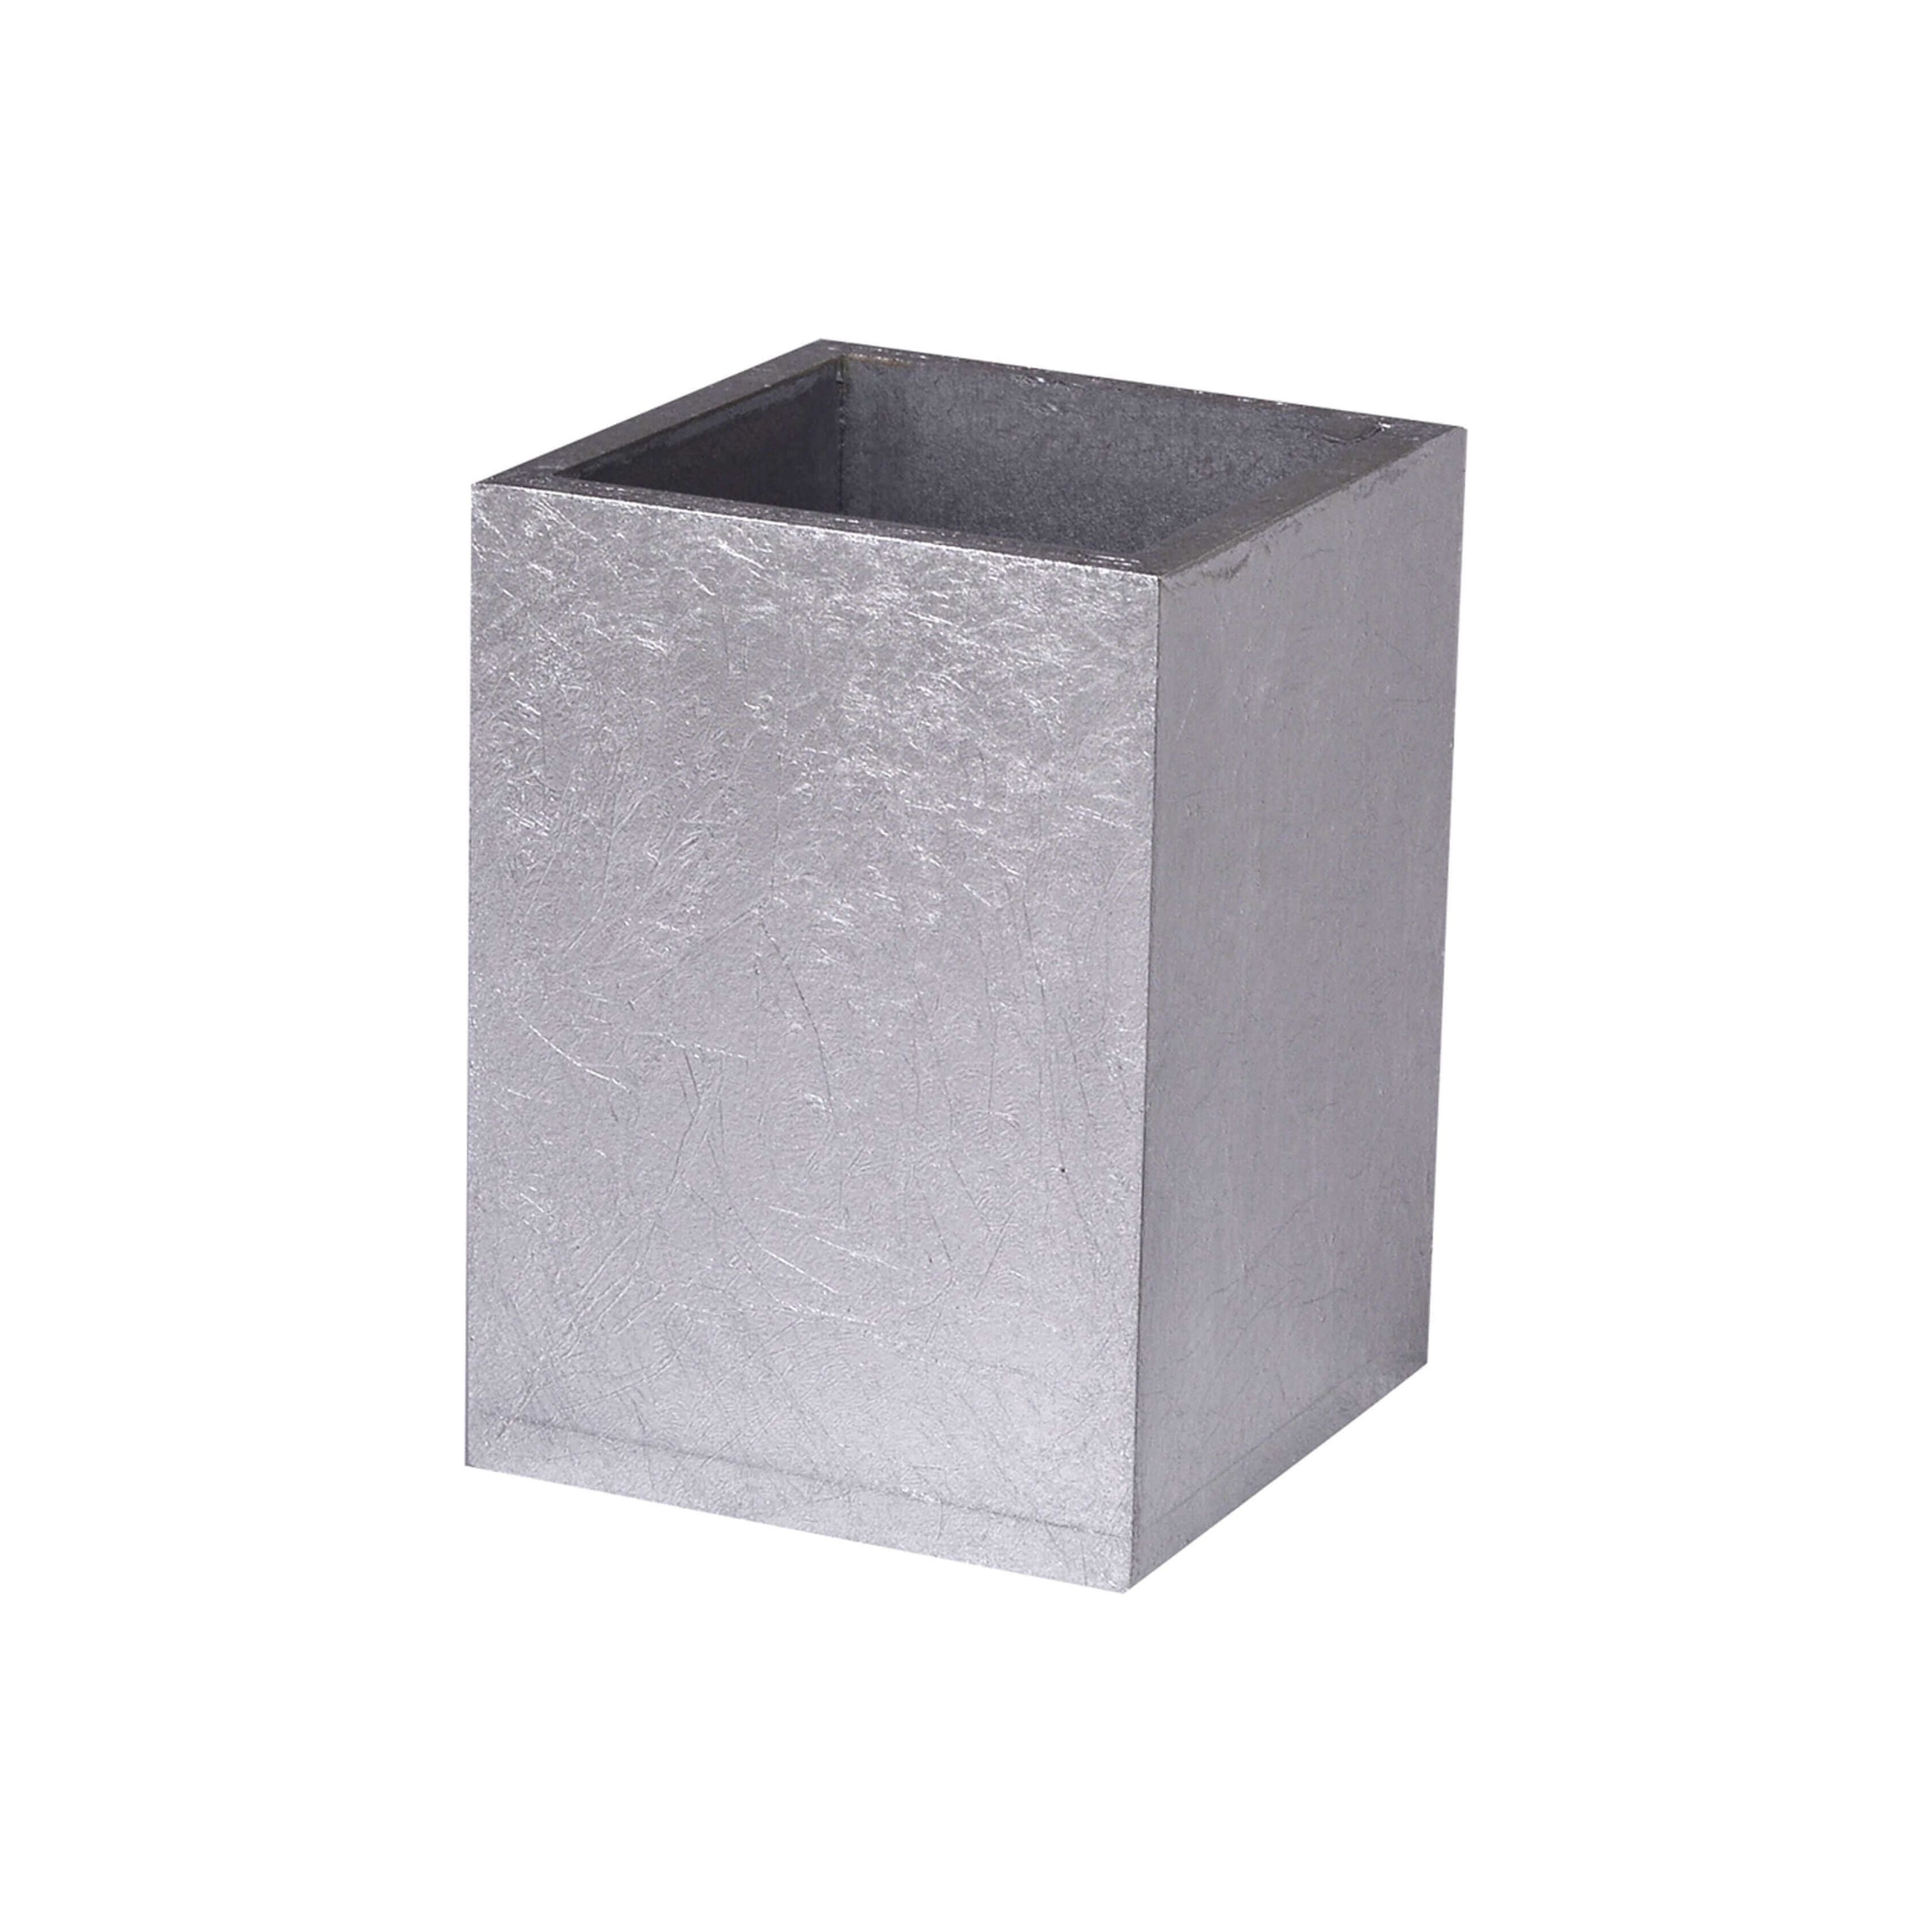 Mike + Ally - EOS Silver Brush holder - 32023S - Silver - 